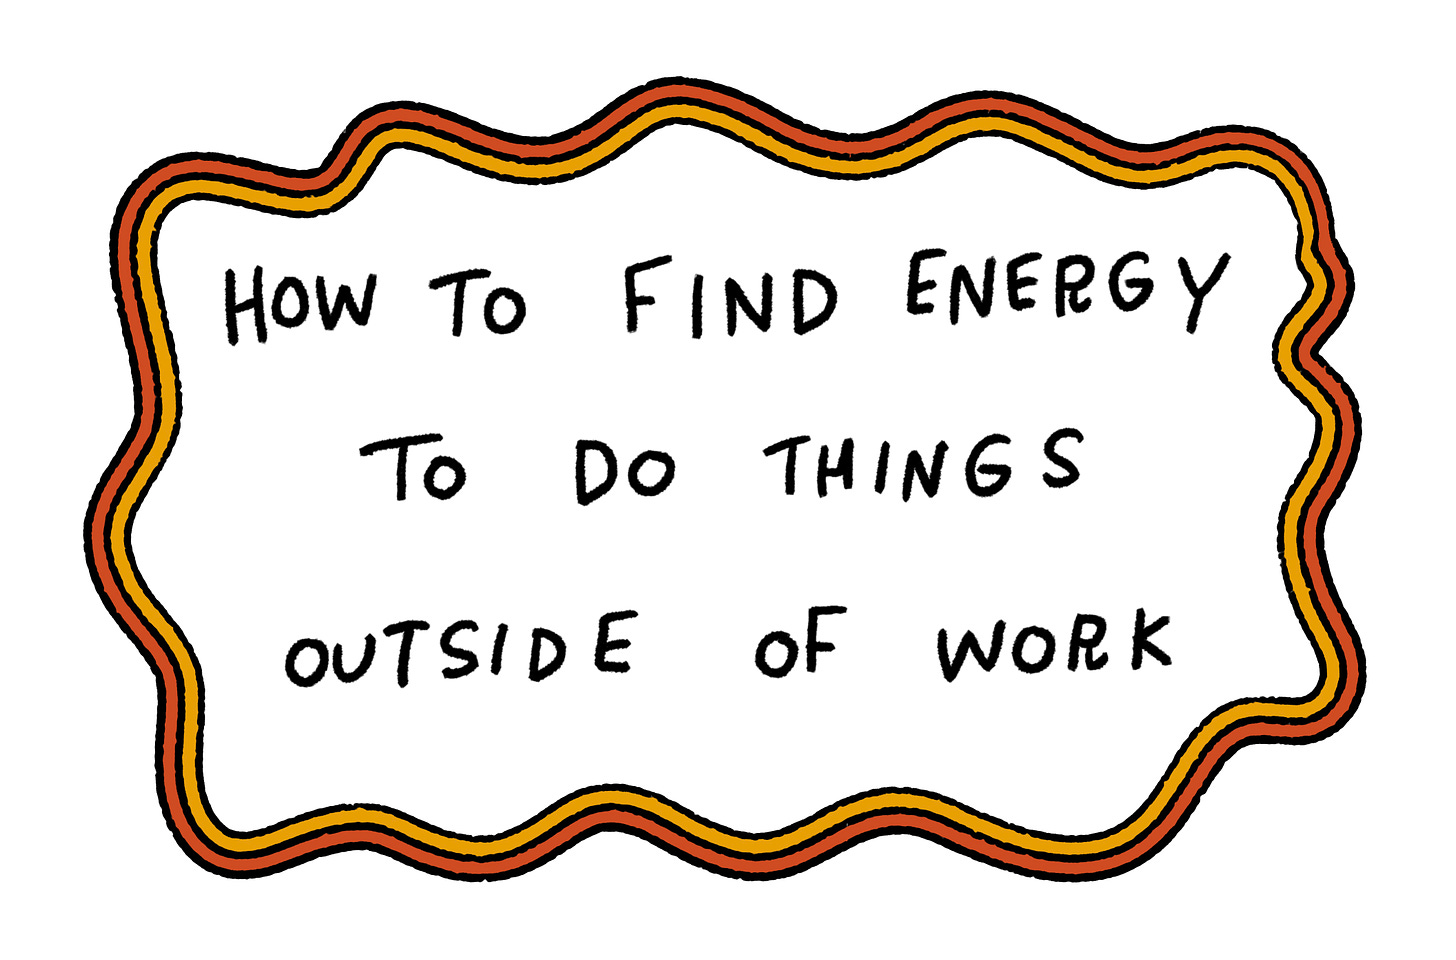 A guide to finding energy to do things outside of work